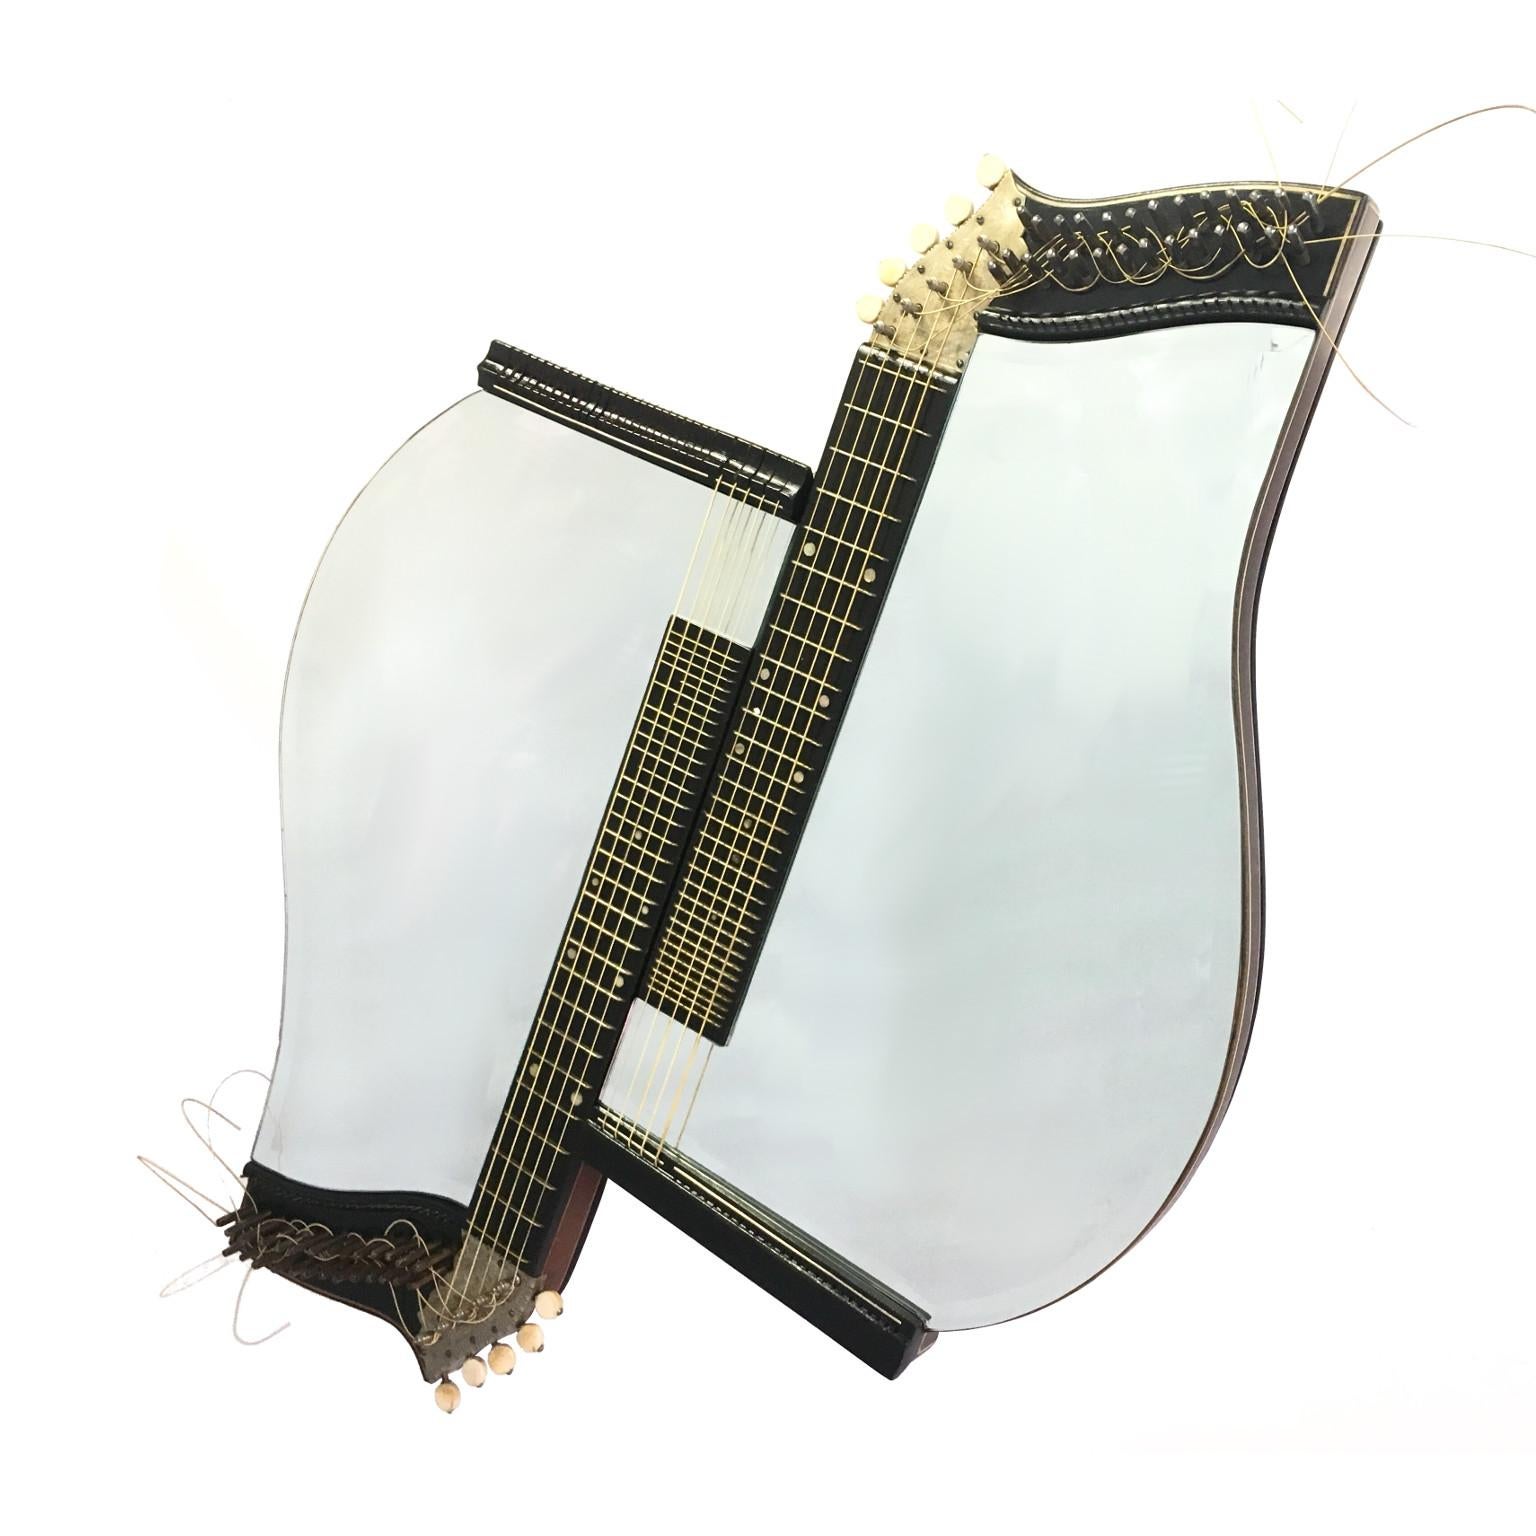 Gilt One of a Kind Contemporary Wall Mirror from Two Old String Instruments For Sale